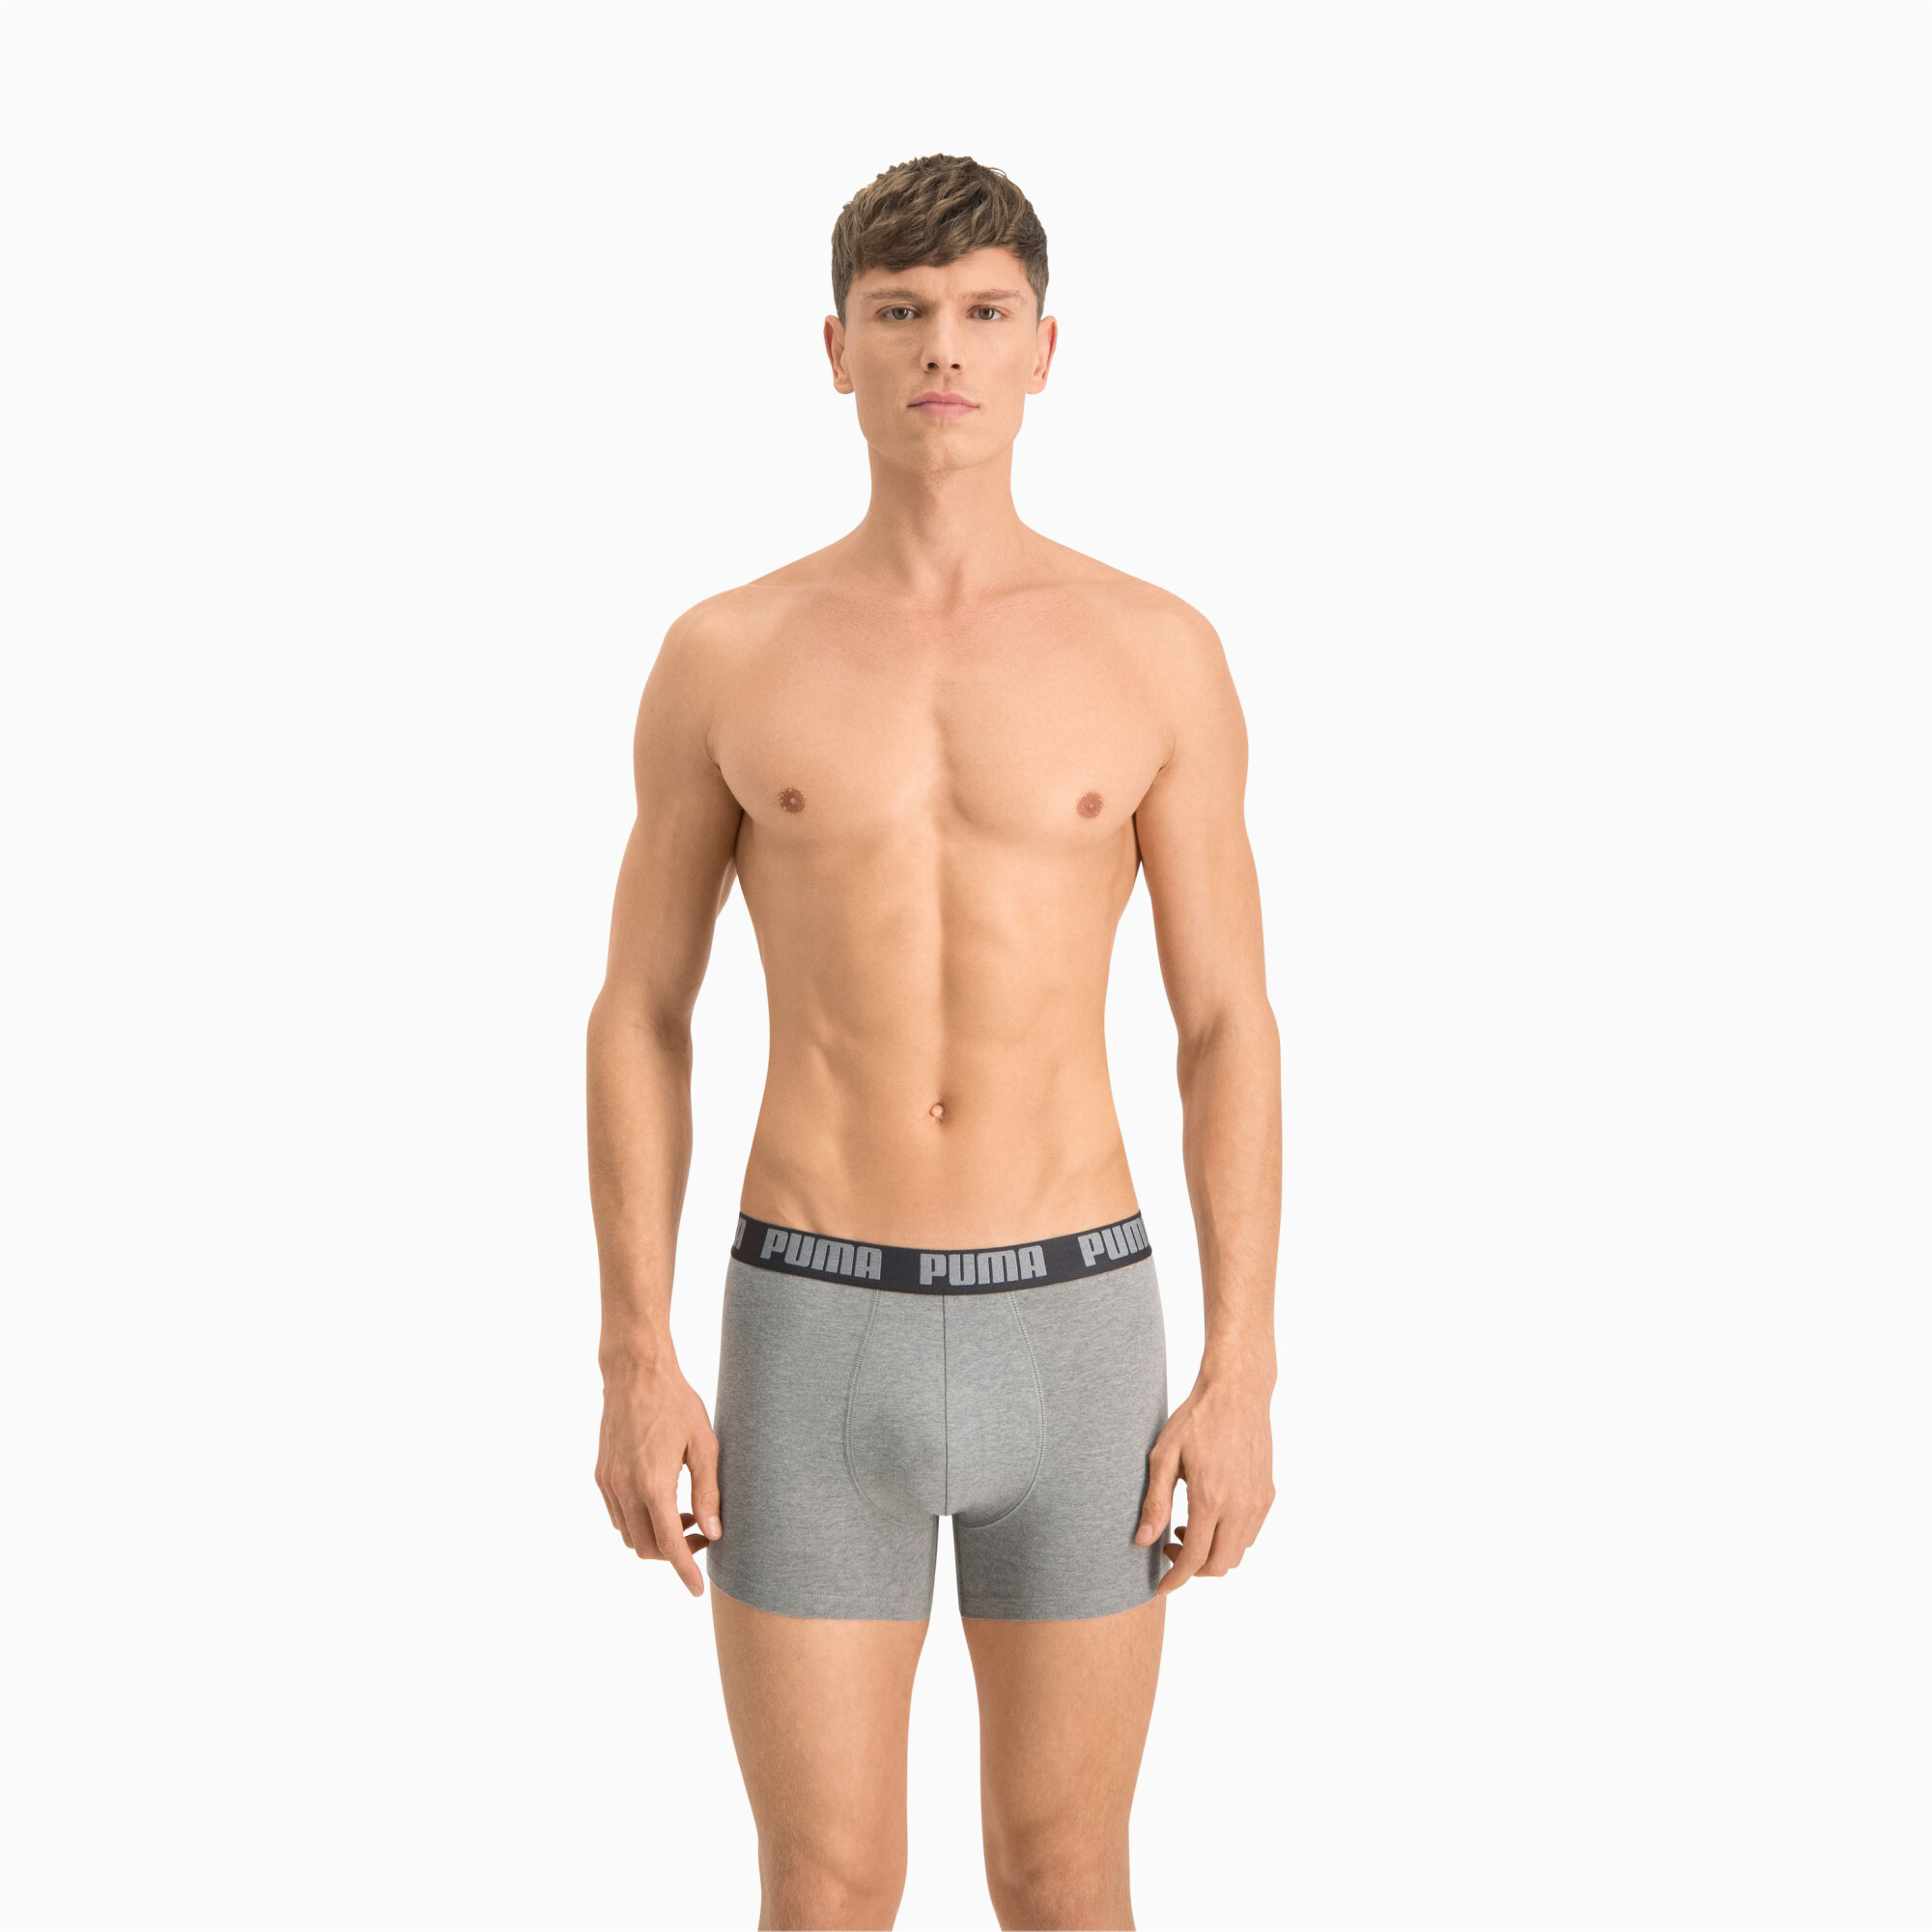 Men's PUMA Basic Boxers 2 Pack In Gray, Size Large